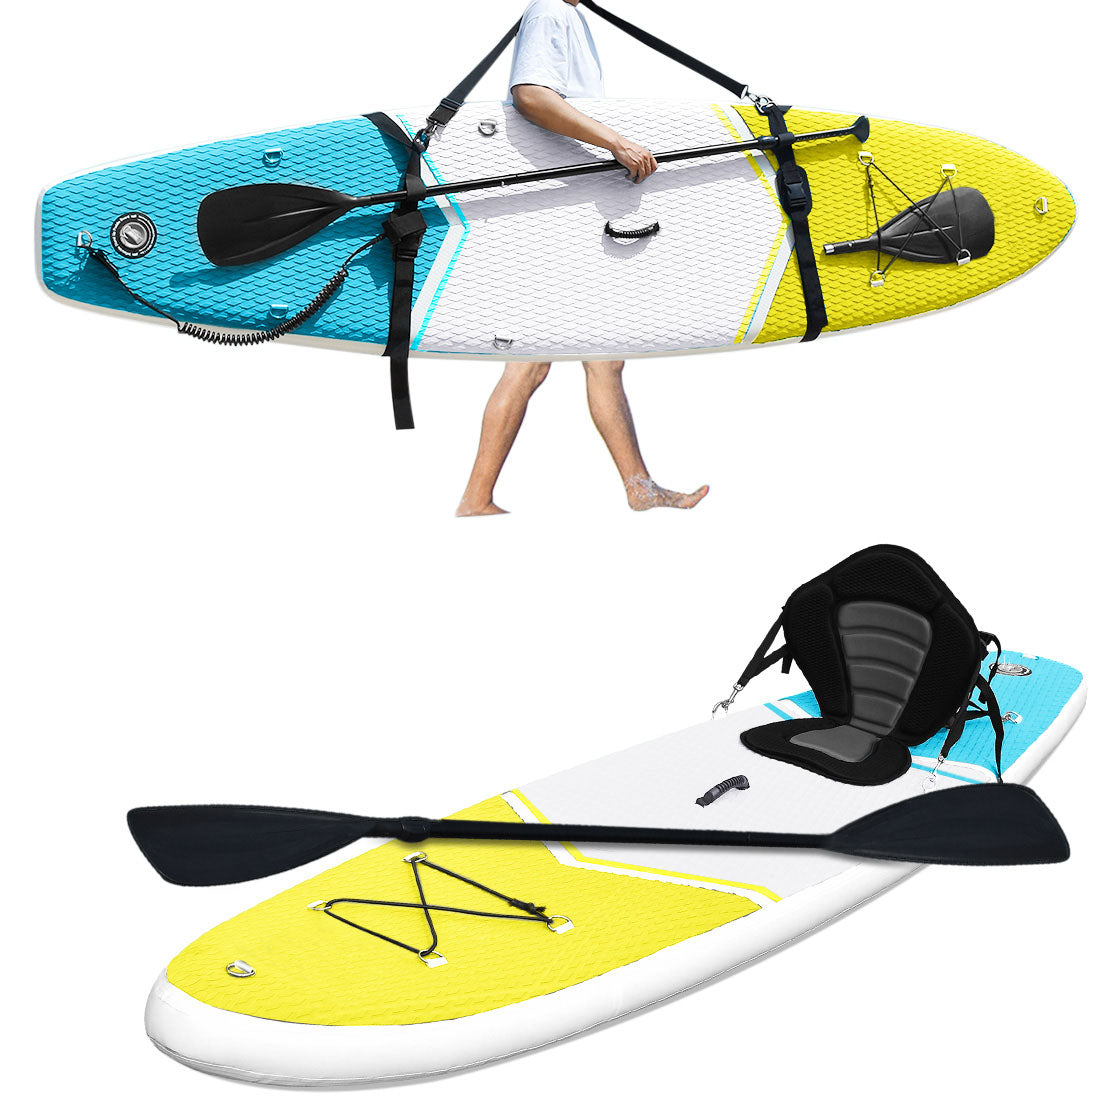 10'x30"x6" Inflatable SUP Paddle Board-Yellow